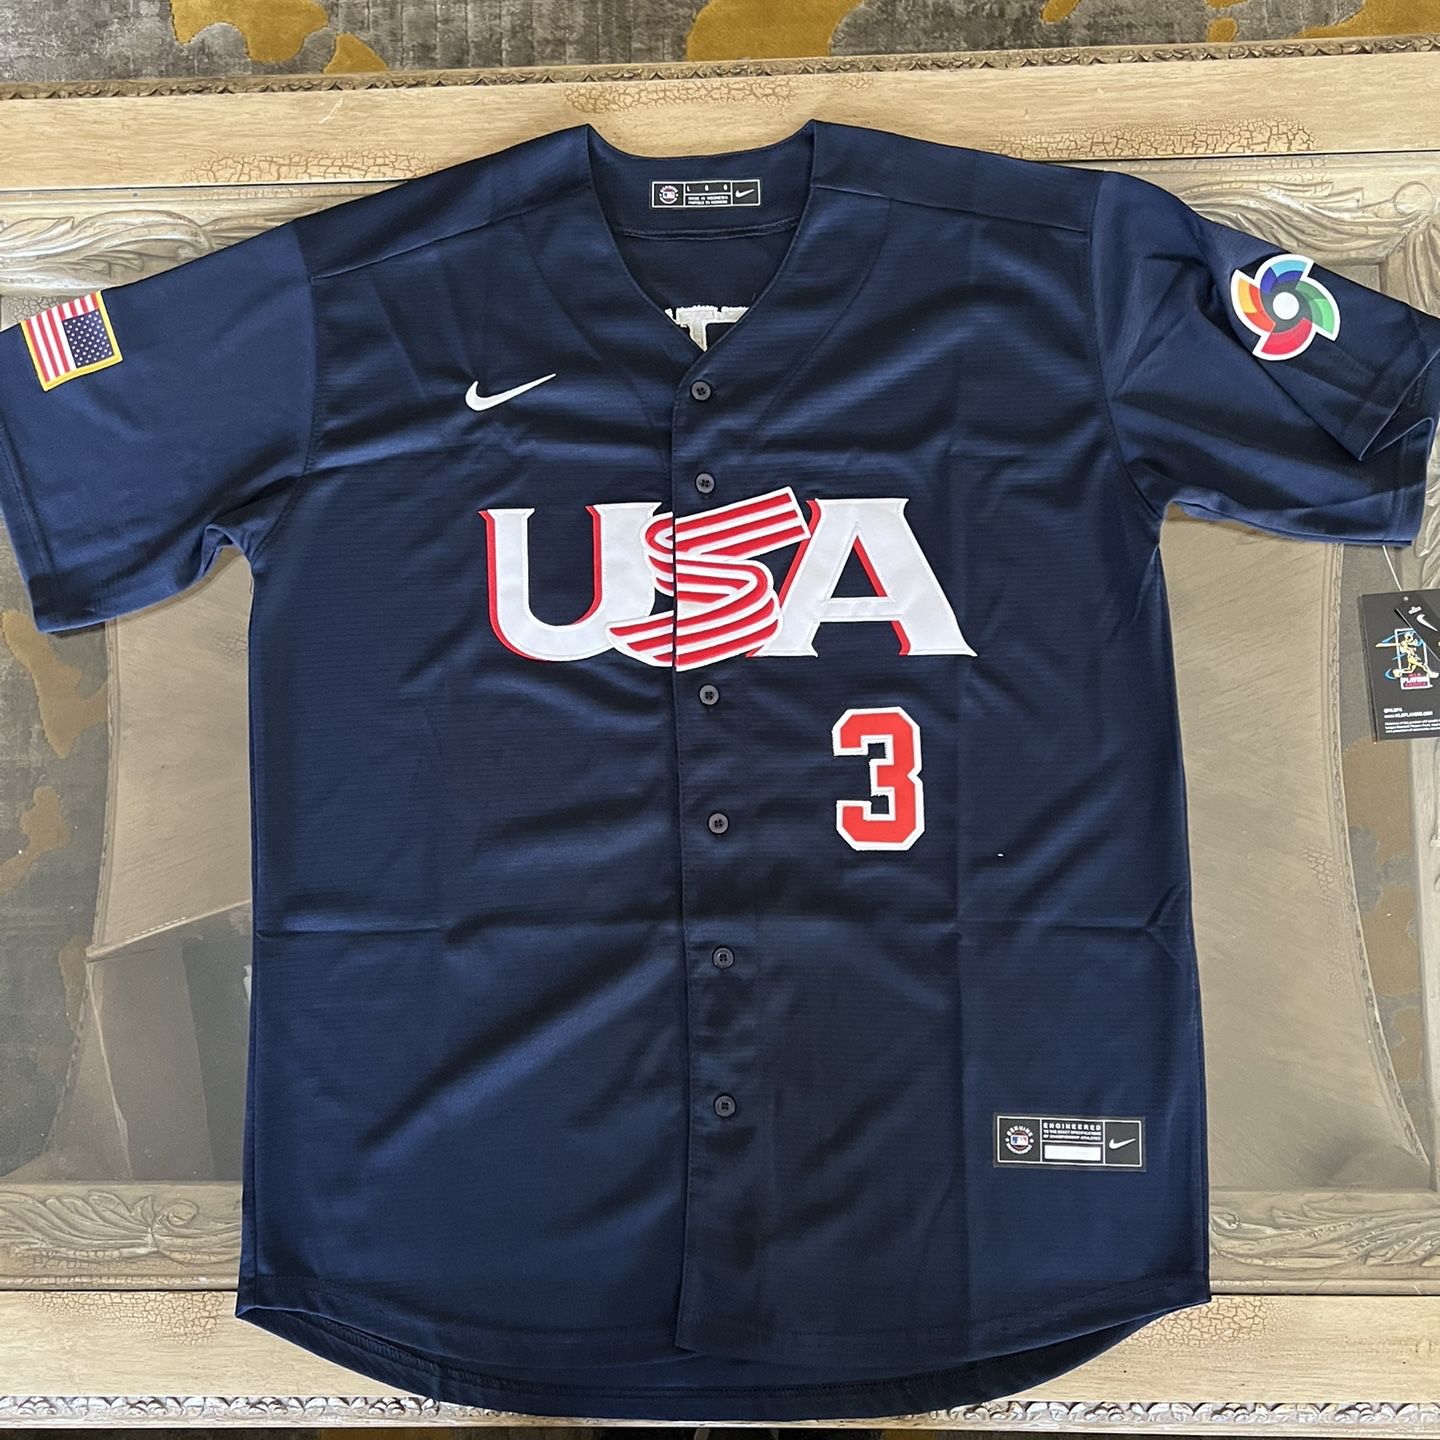 Mookie Betts Pinstripe Dodgers Jersey Gold Colorway..everything  Stitched..size 2X for Sale in Long Beach, CA - OfferUp